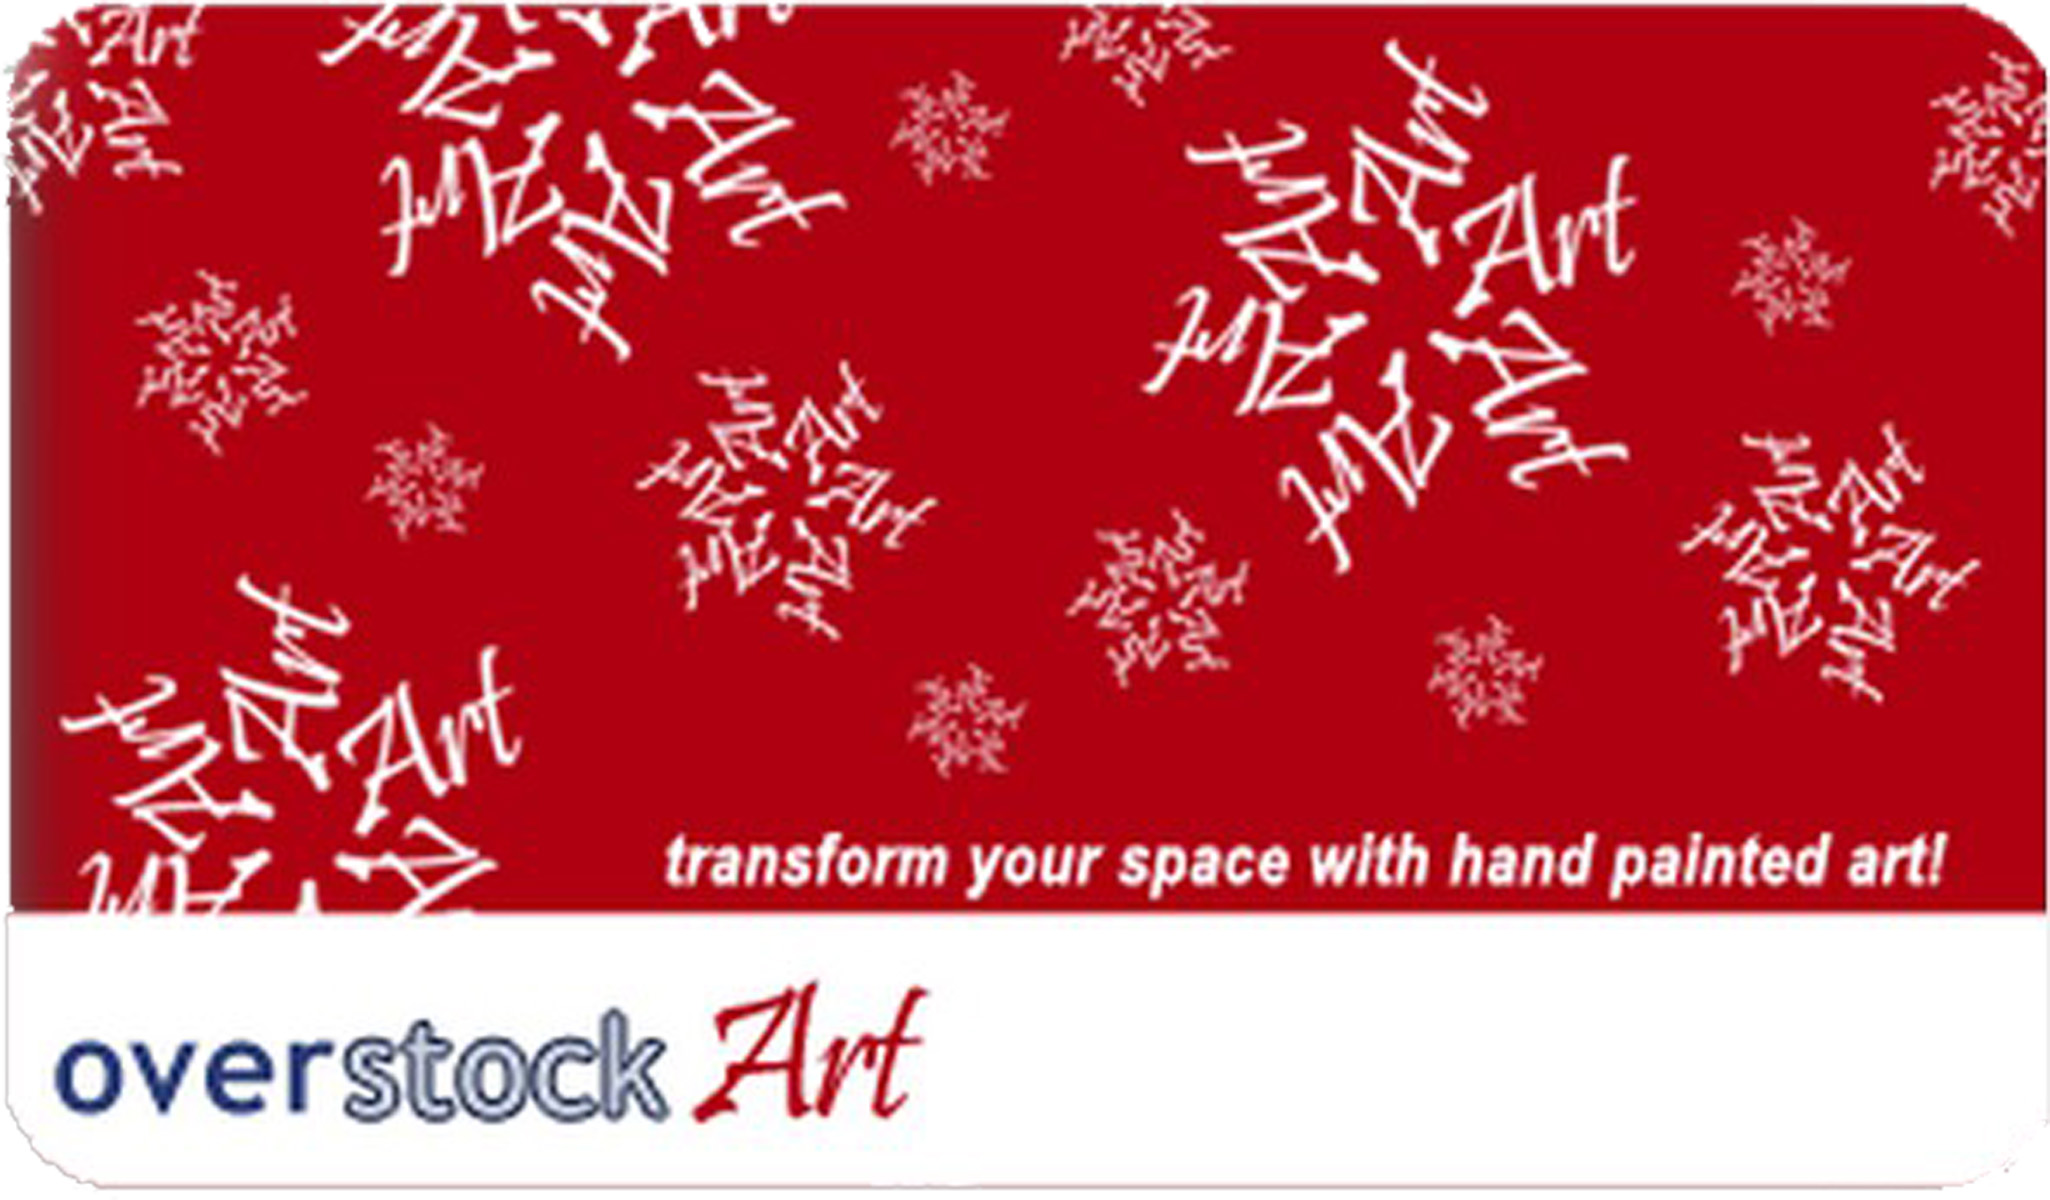 For the gift giver who still is having trouble deciding, overstockArt.com gift certificates are also available.